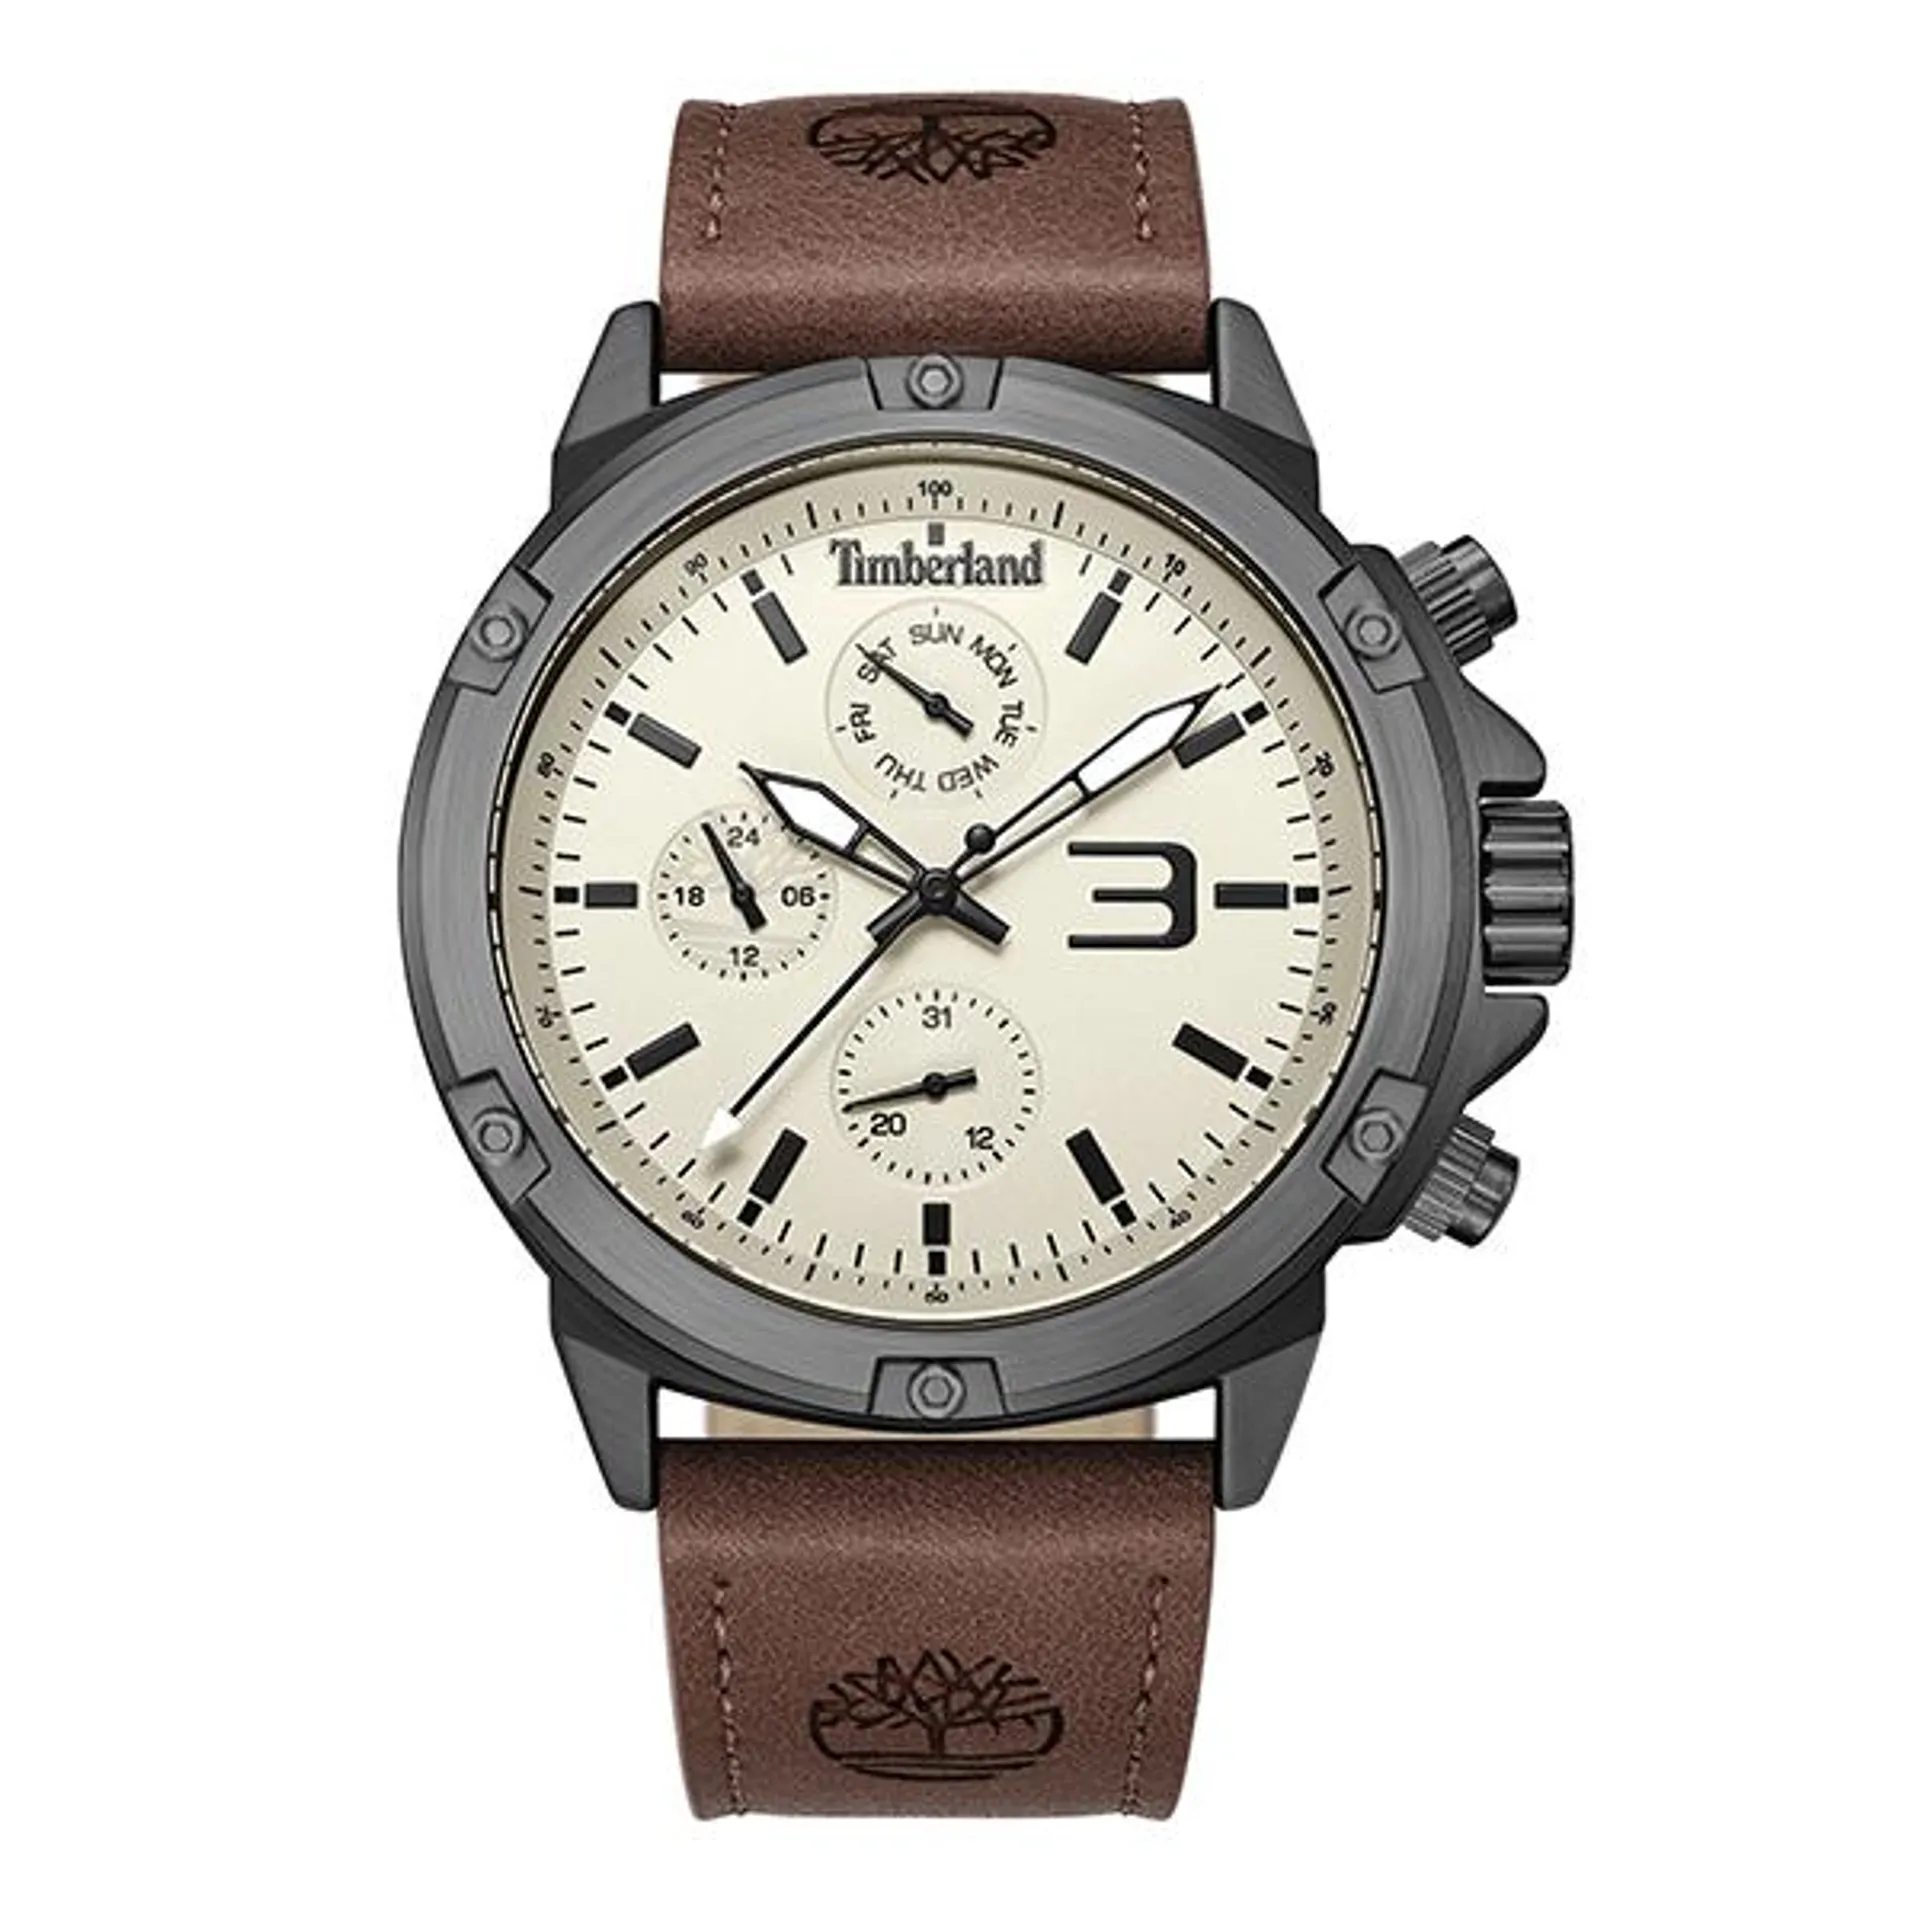 Timberland Gents Rangeley Watch with Genuine Leather Strap